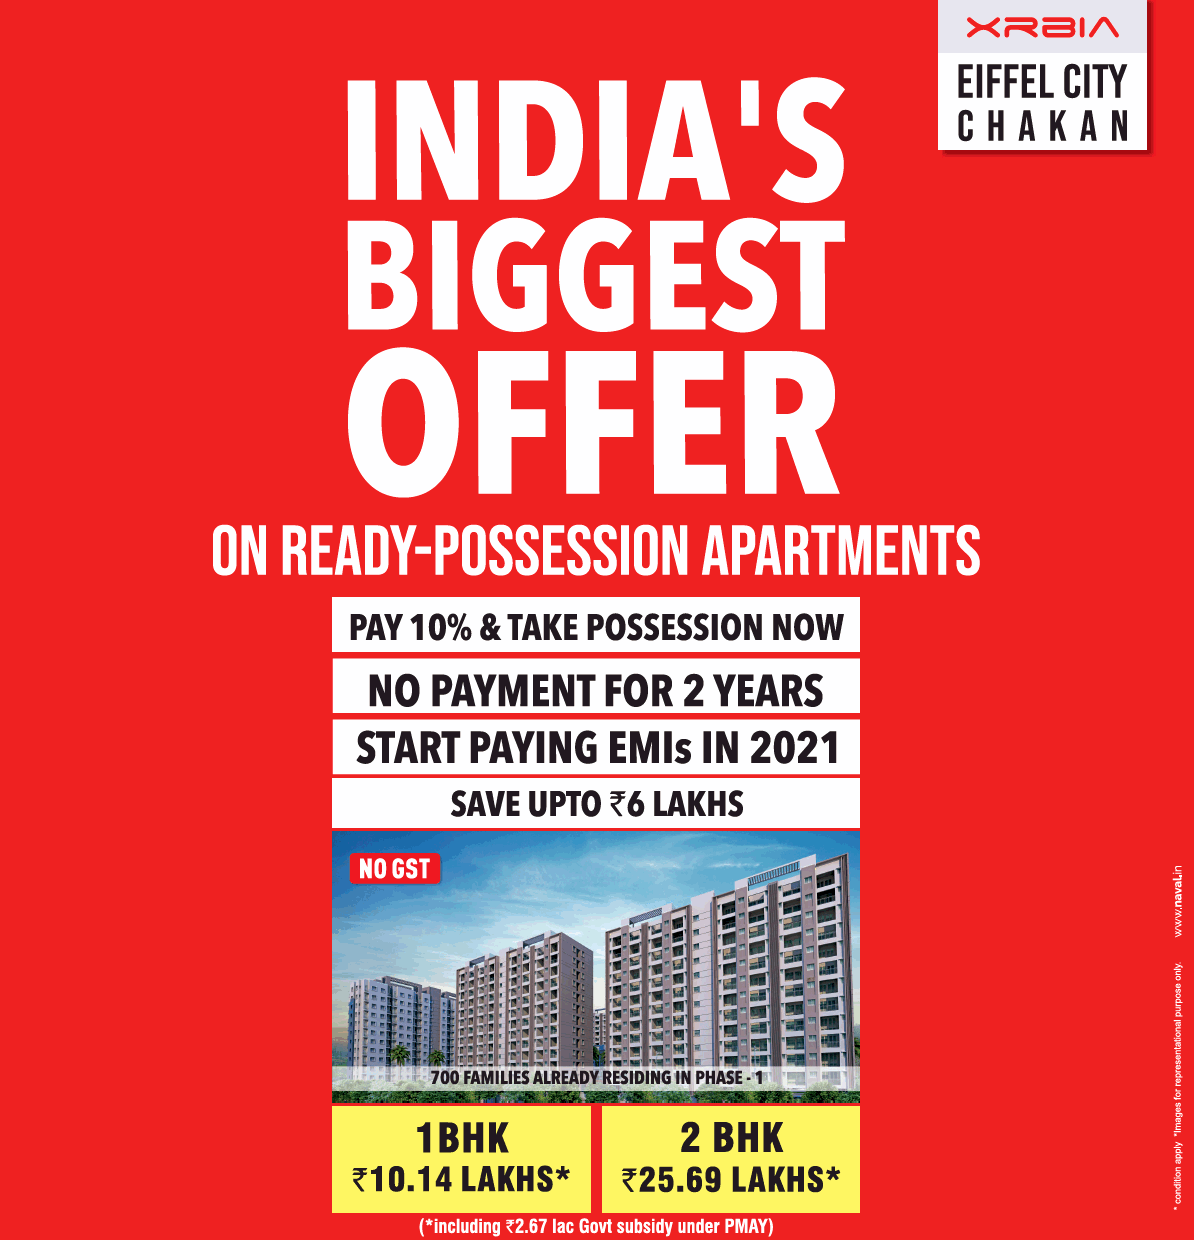 India's biggest offer on ready possession apartments at XRBIA Eiffel City in Pune